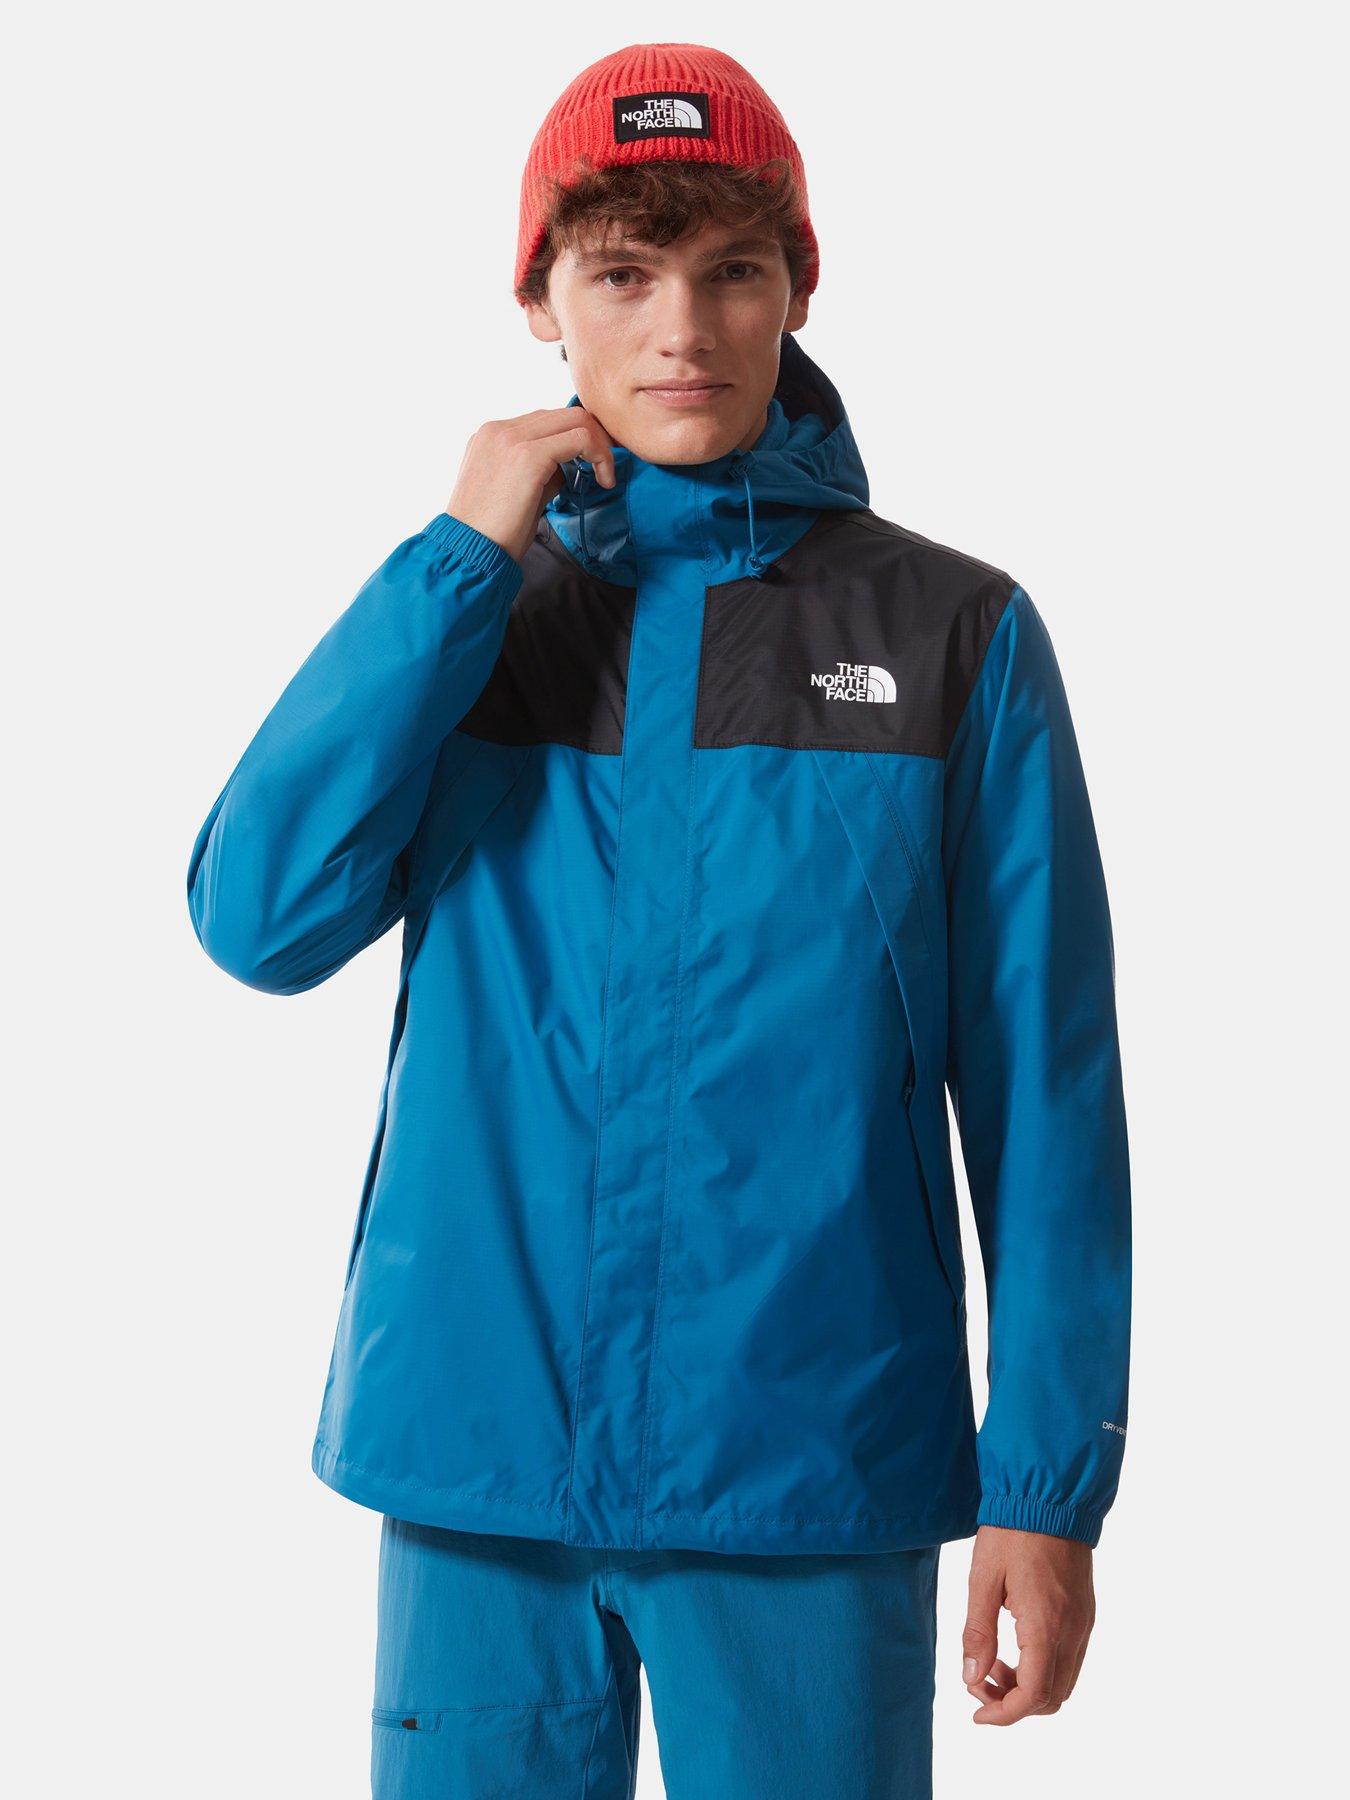 THE NORTH FACE Antora Jacket - Blue/Black | very.co.uk